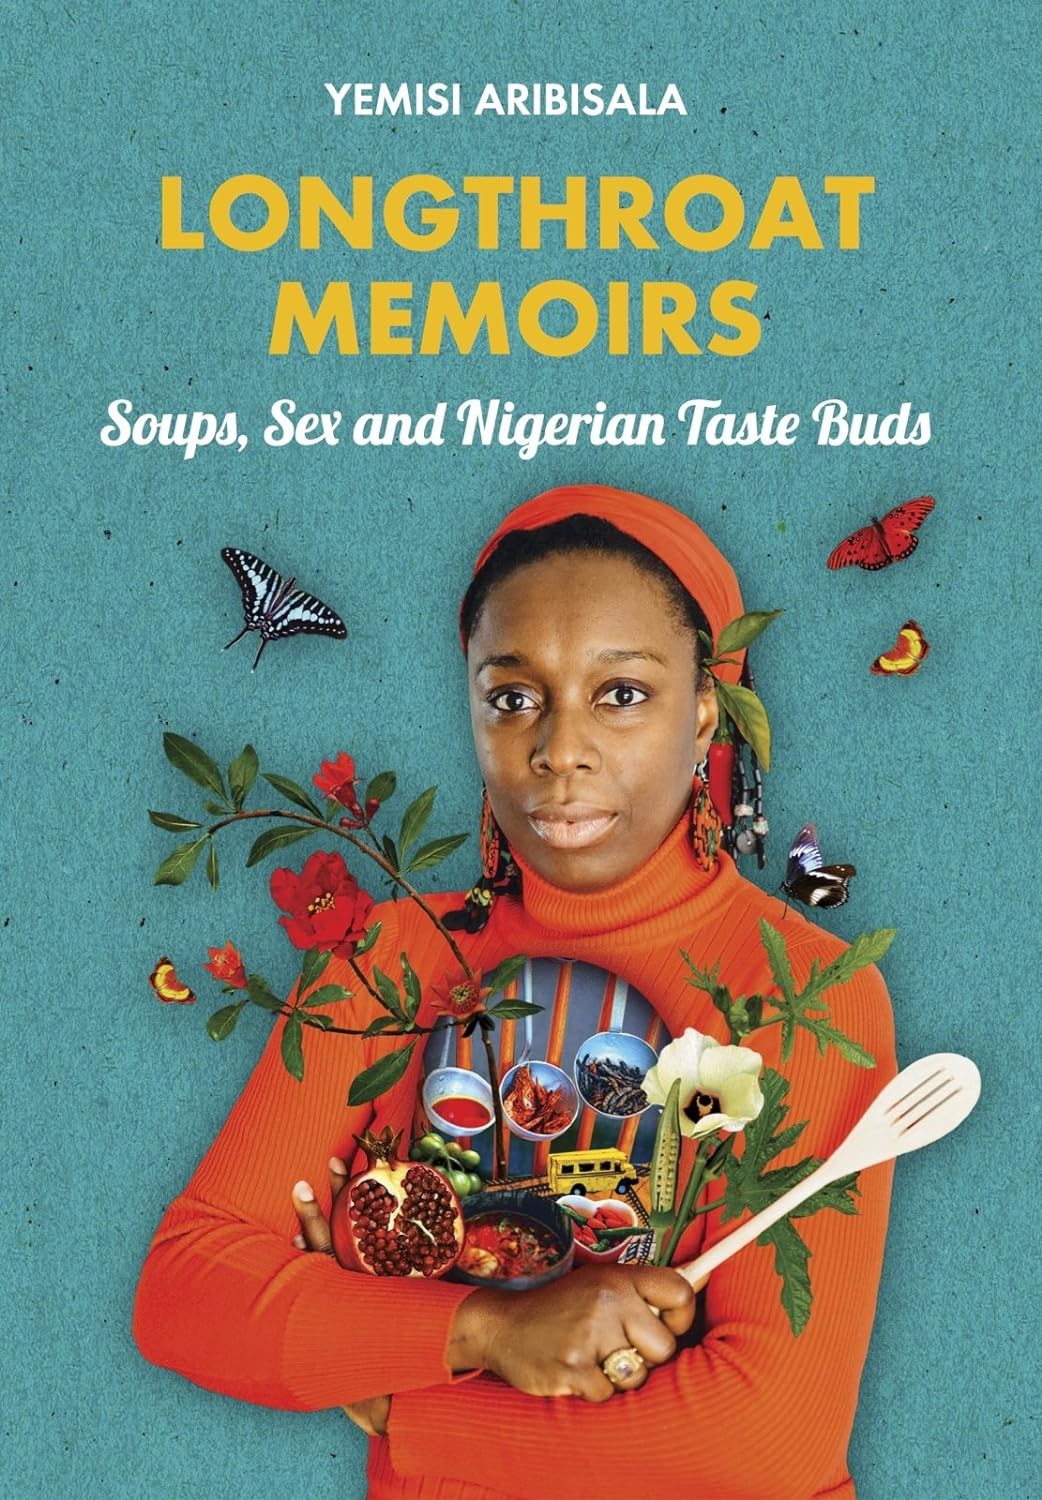 MAY + JUN / Alicia Kennedy's The Desk Bookclub pick / Longthroat Memoirs: Soups, Sex and Nigerian Taste Buds by Yemisi Aribisala